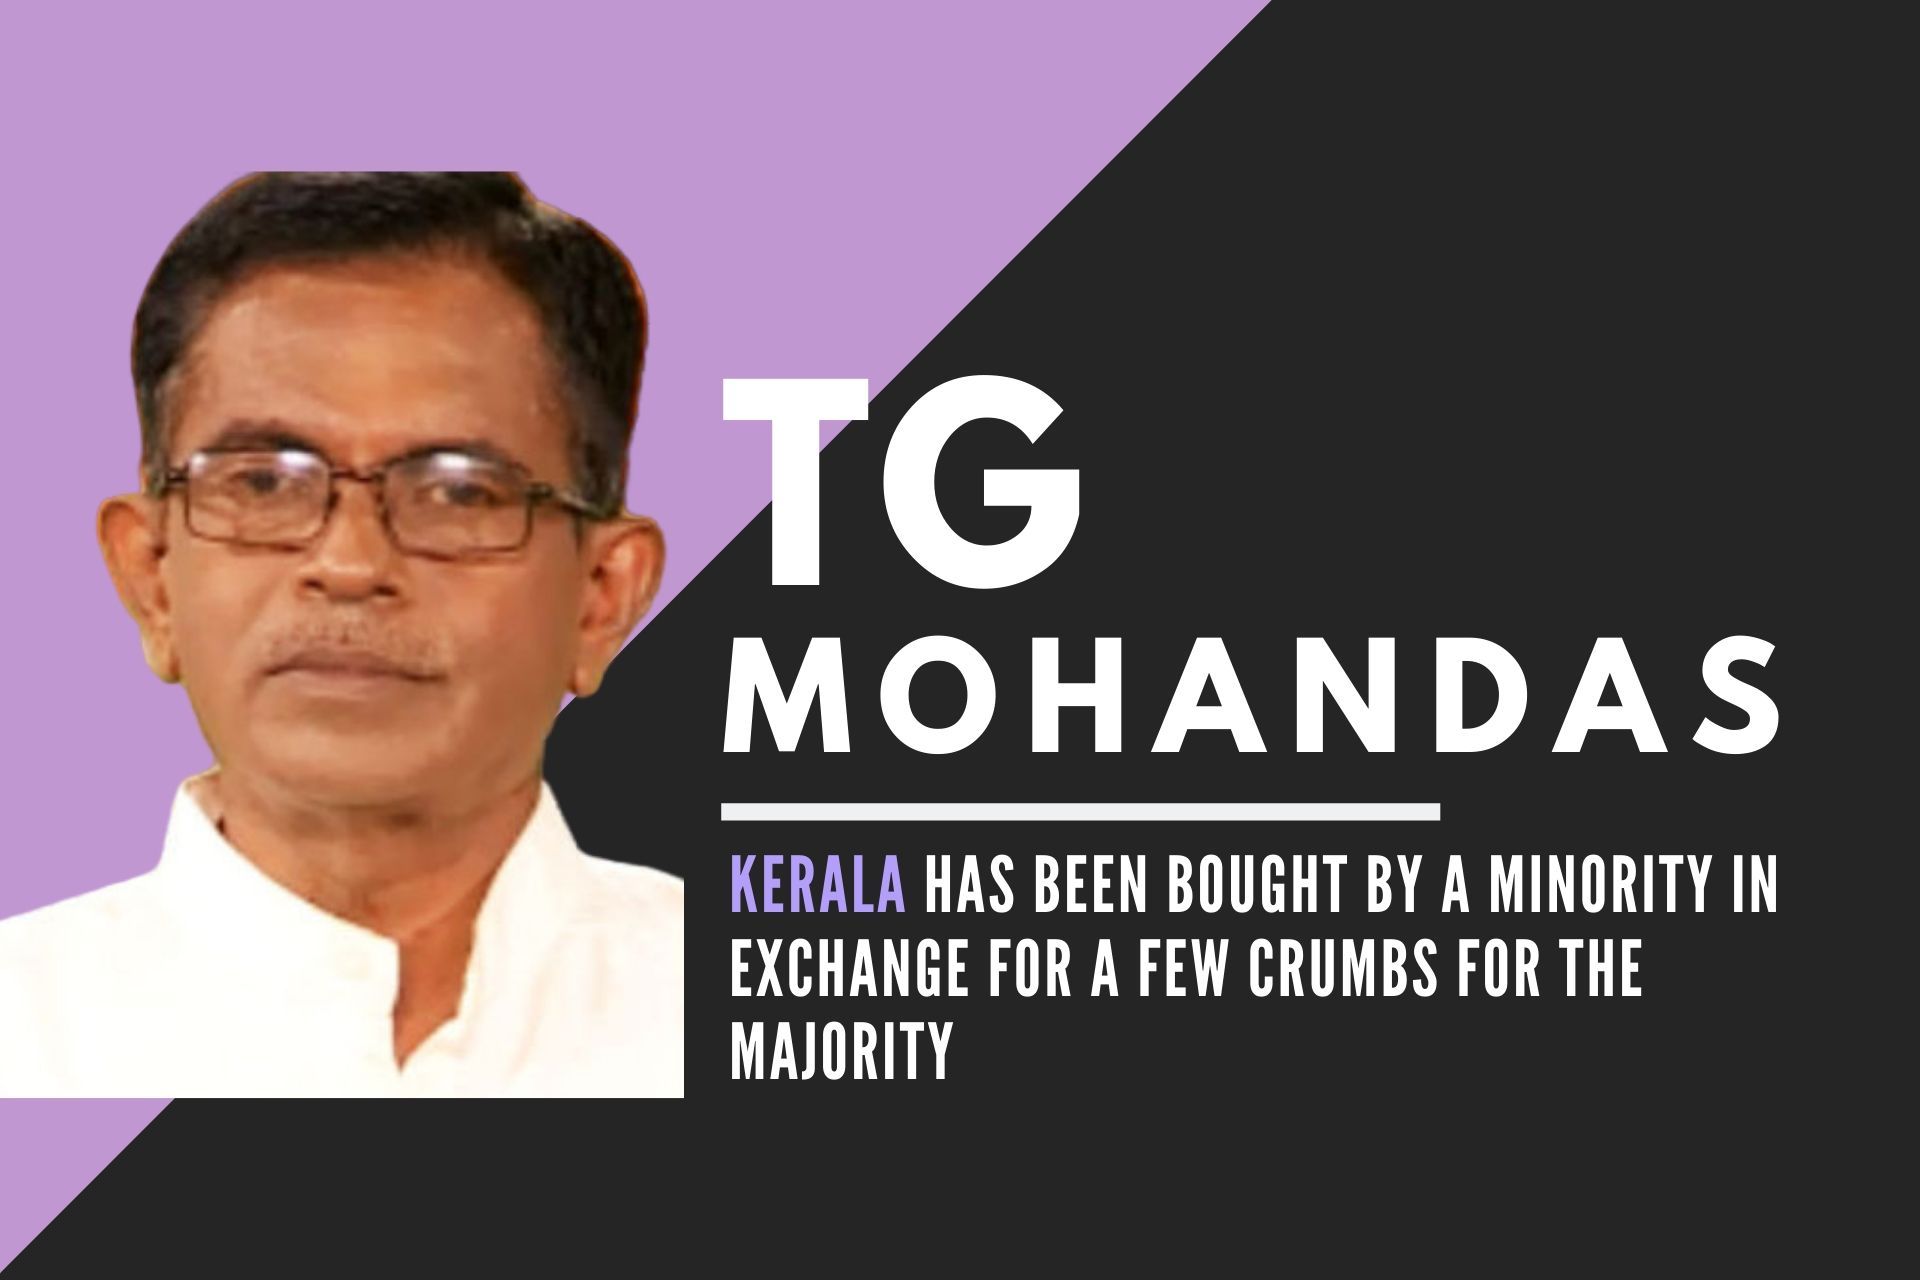 More details tumble out from the closet from T G Mohandas on when Counterfeit currency entered Kerala. Another shocking fact - Dubai economically controls three directions of Kochi city with the South side being the only one open. Who runs Kerala? Watch this hangout to know!